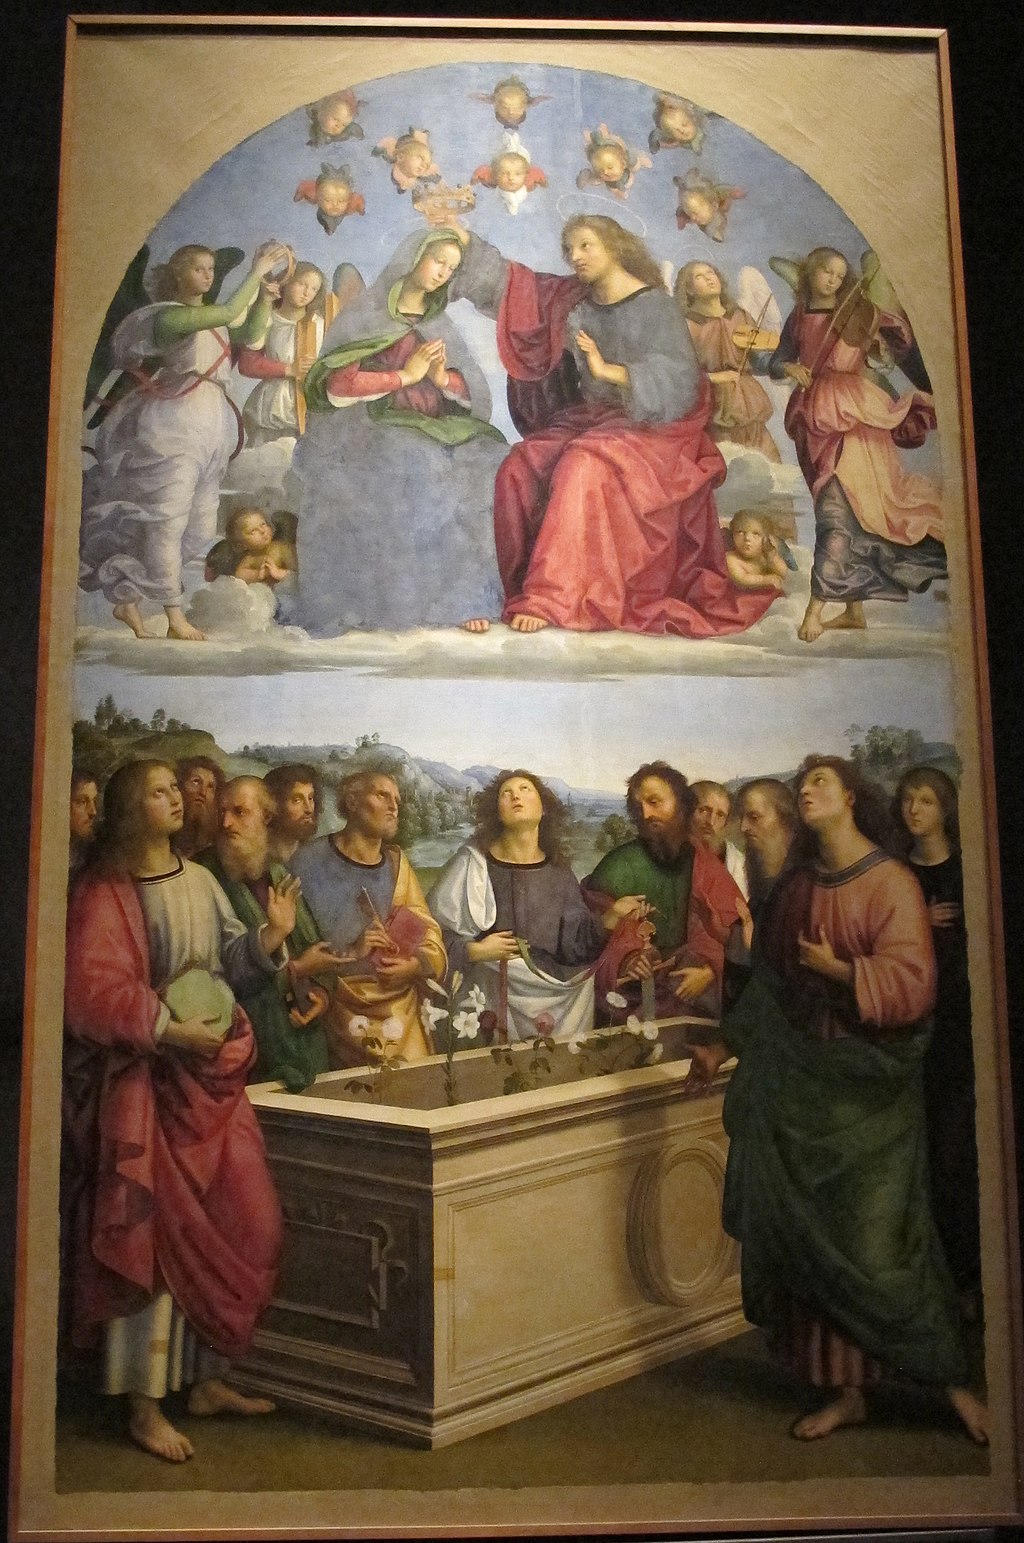 Notice how the upper portion of The Crowning of the Virgin is much brighter, dividing the earthly and heavenly scenes.